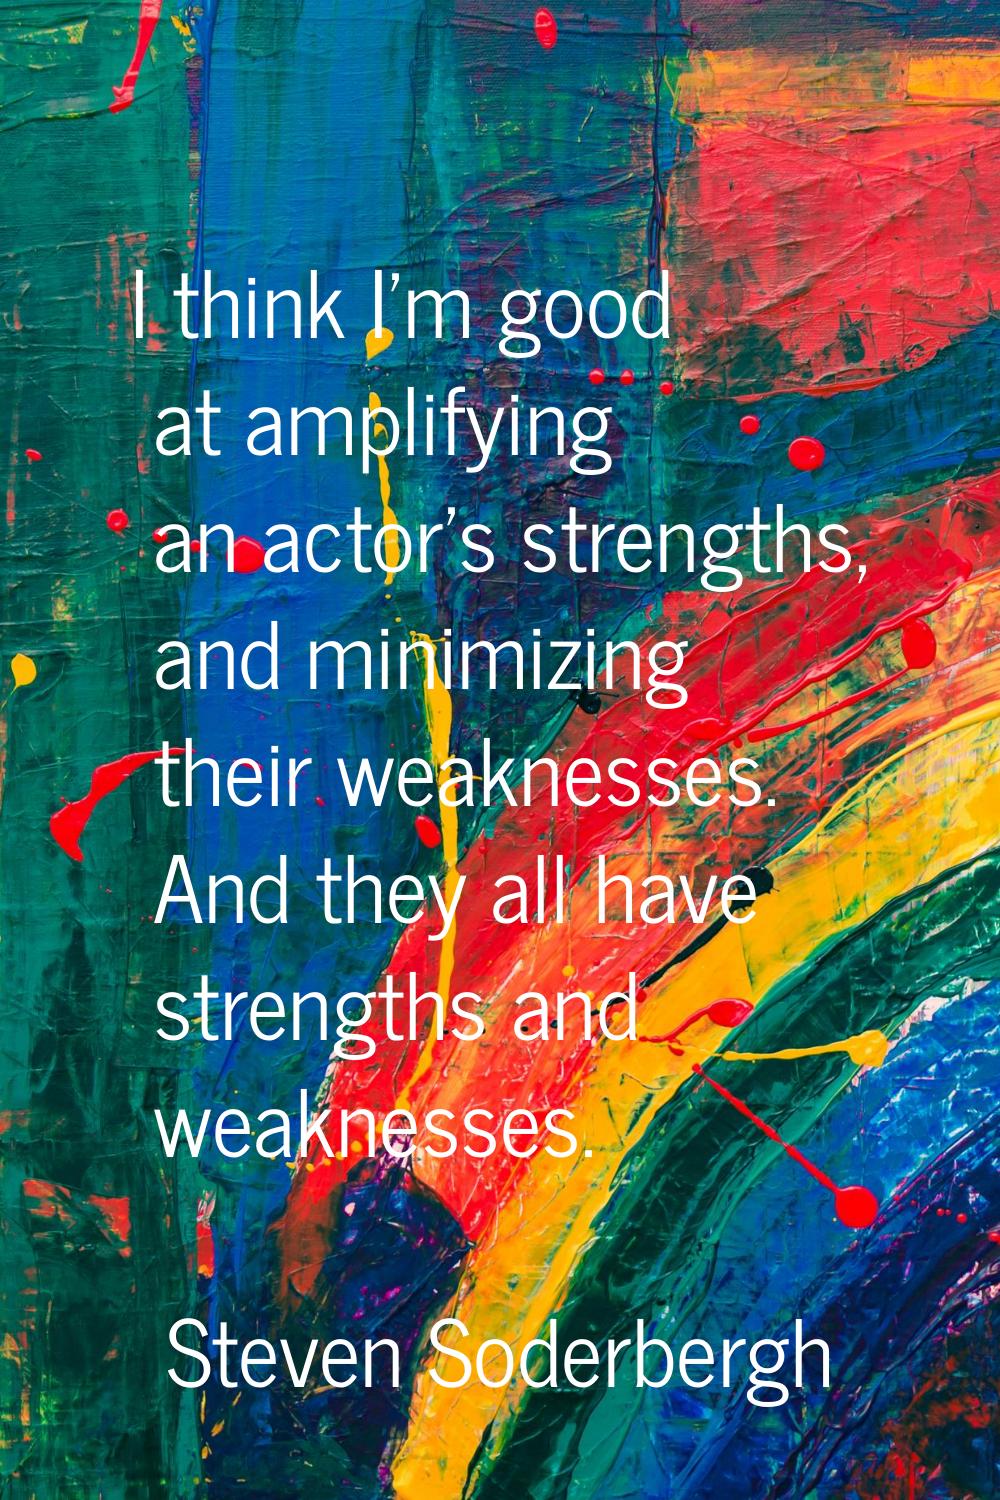 I think I'm good at amplifying an actor's strengths, and minimizing their weaknesses. And they all 